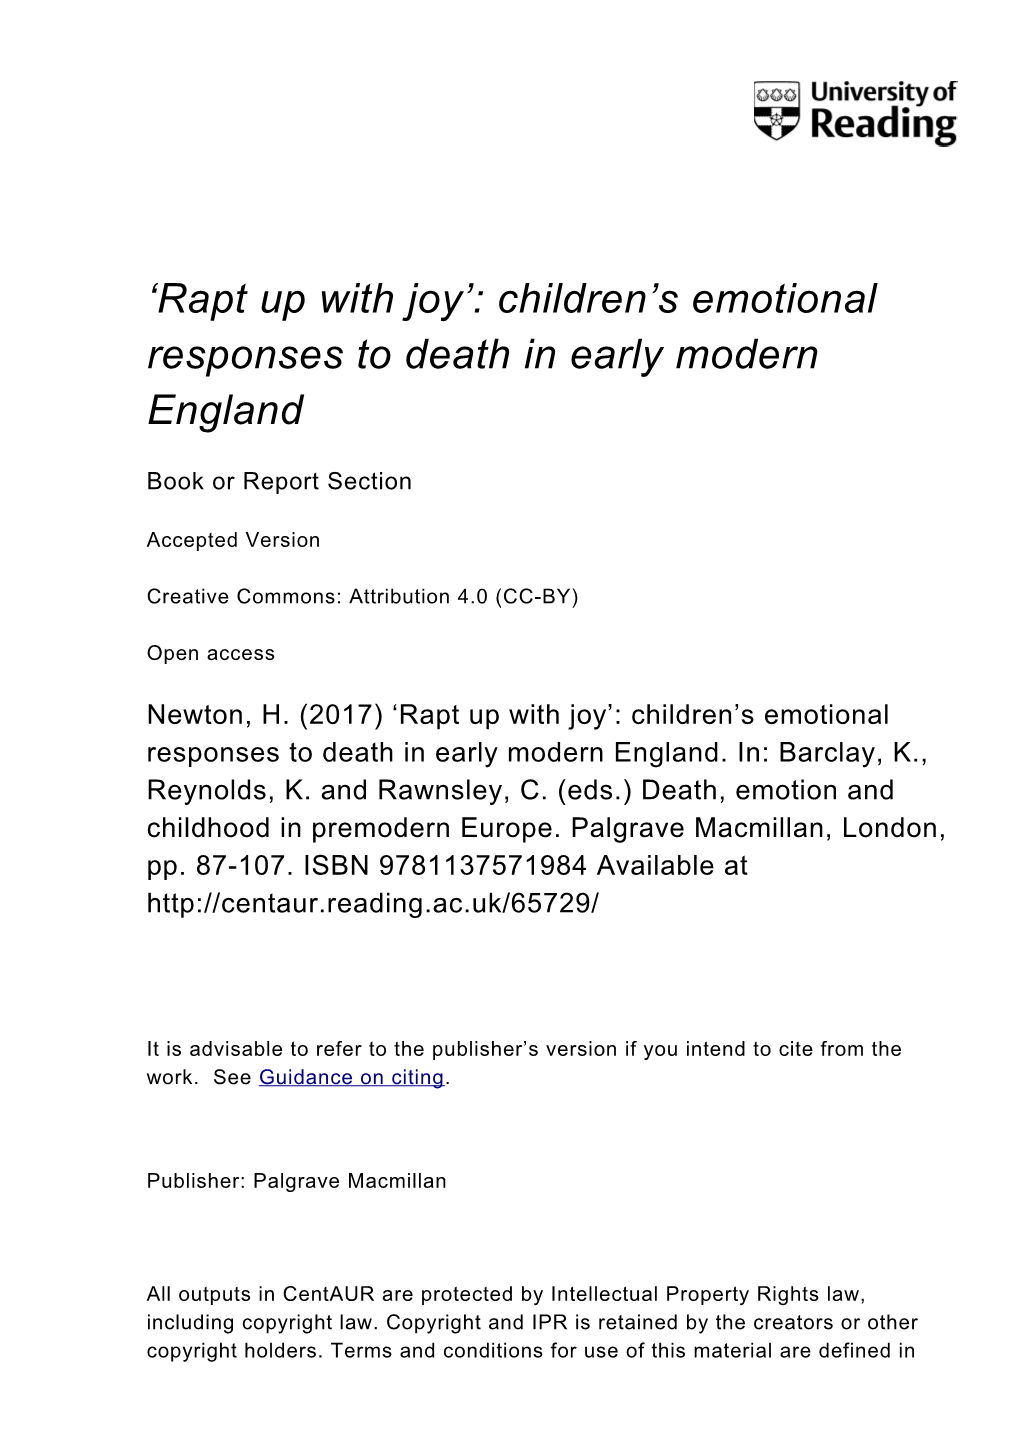 'Rapt up with Joy': Children's Emotional Responses to Death in Early Modern